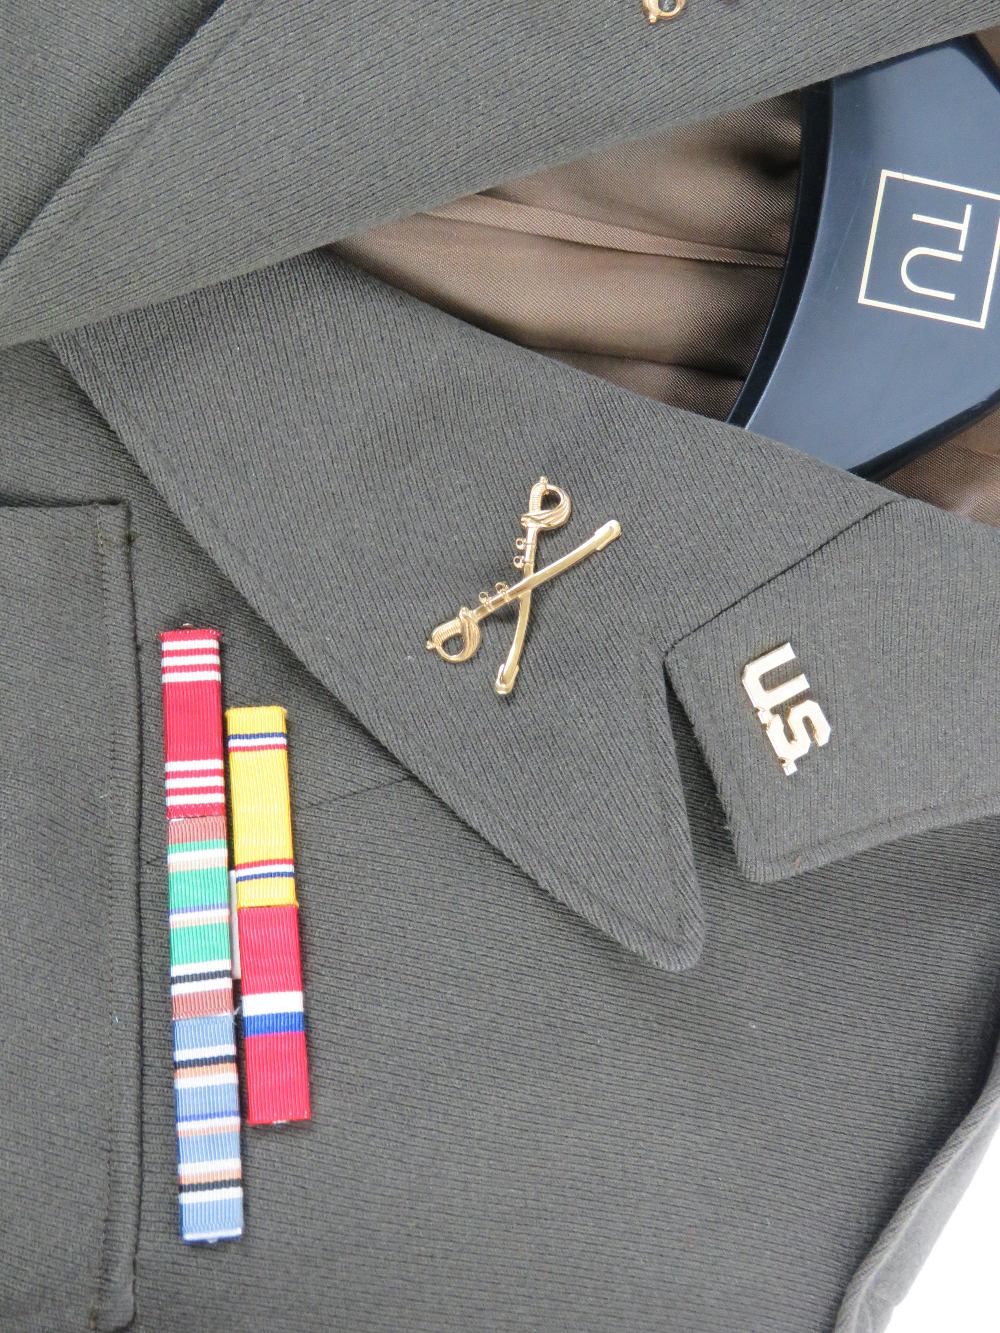 A US 7th armoured division Dress Jacket with insignia. - Image 6 of 6